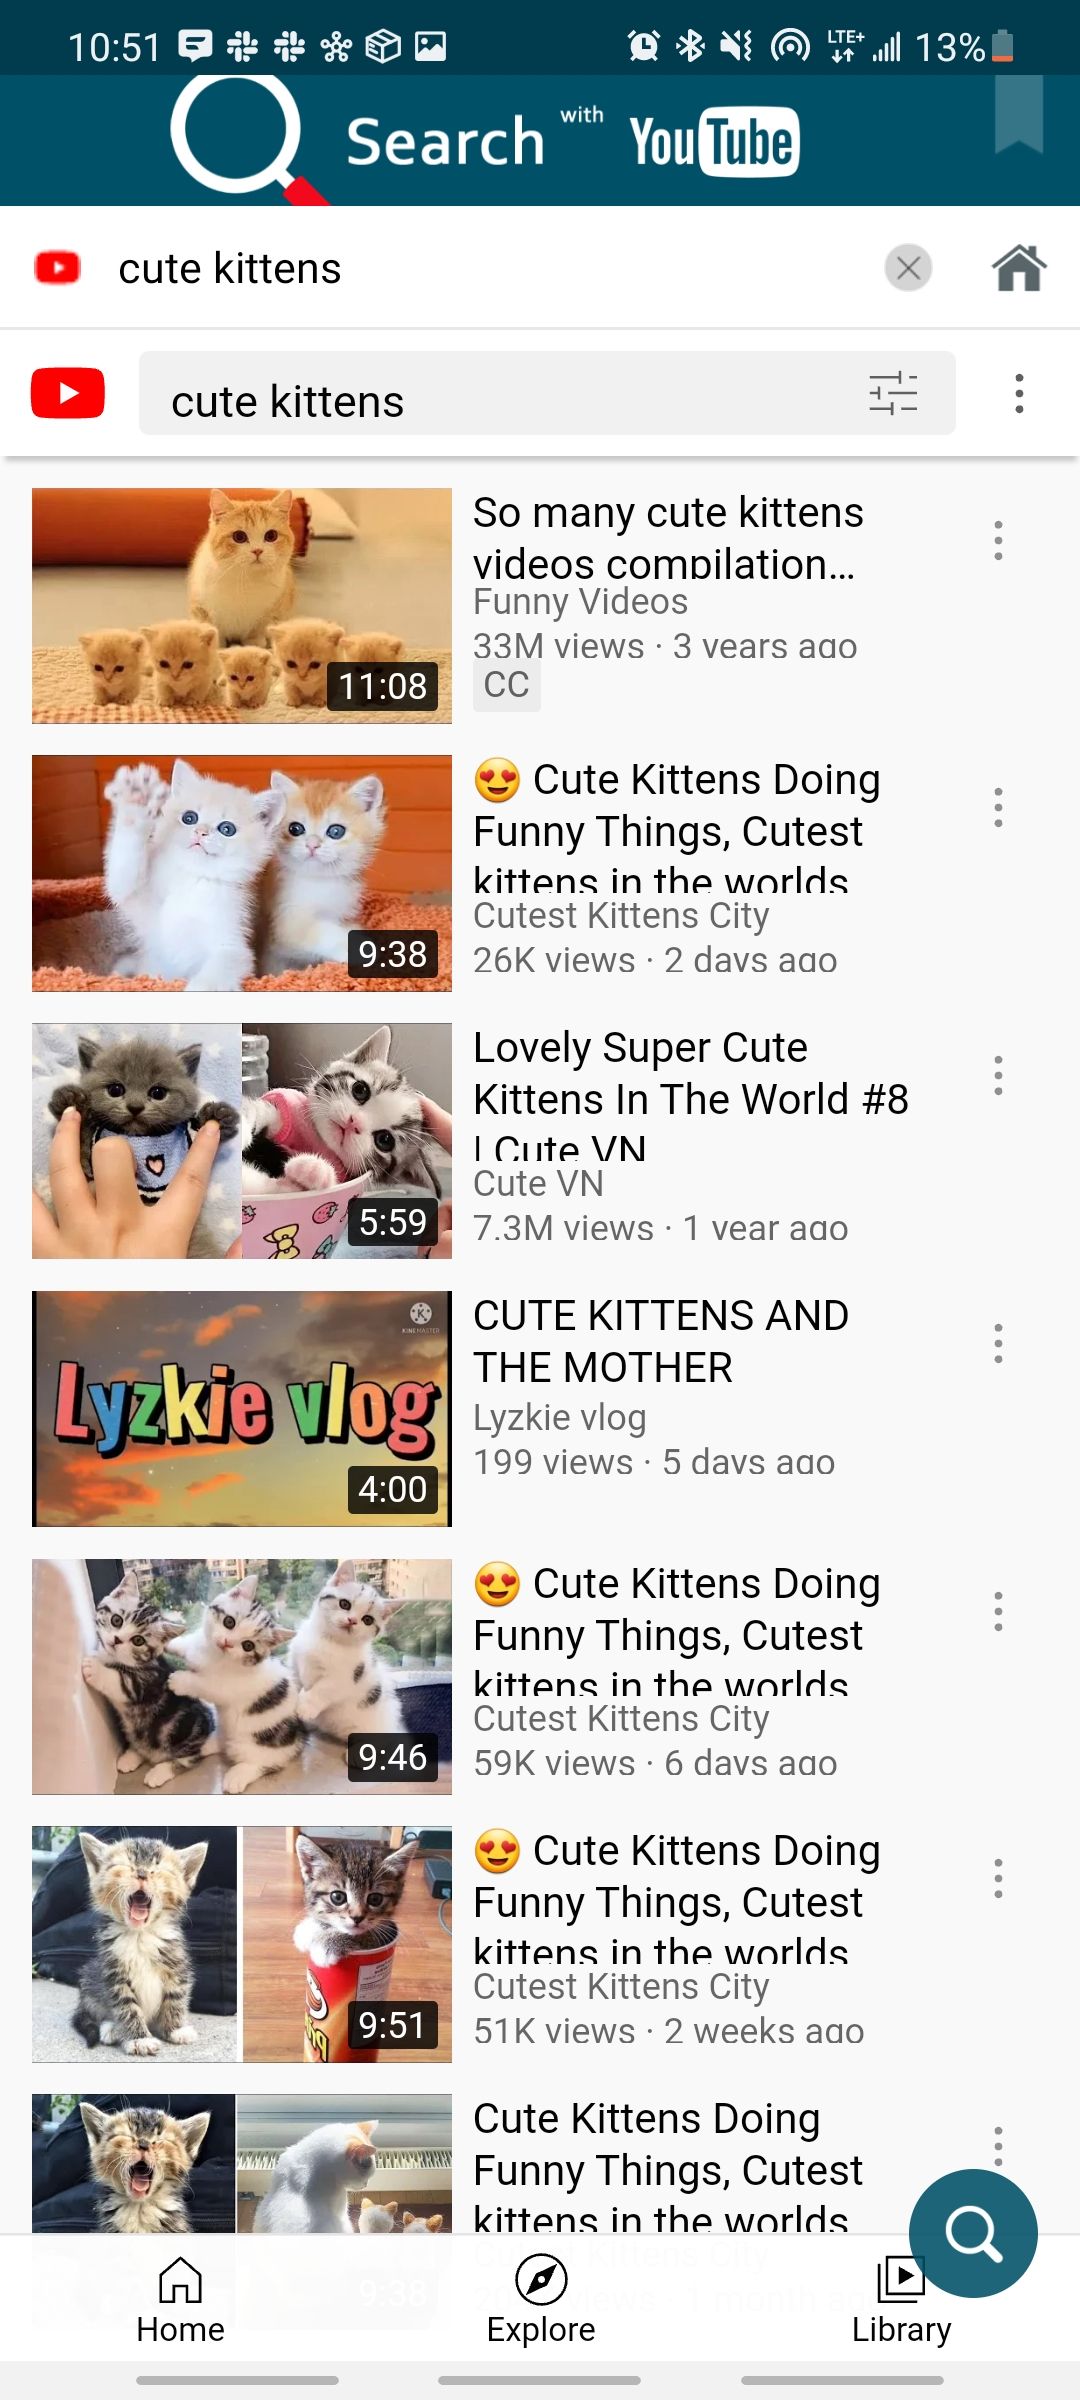 smart-search-app-searching-for-cute-kittens-on-the-youtube-screen-1